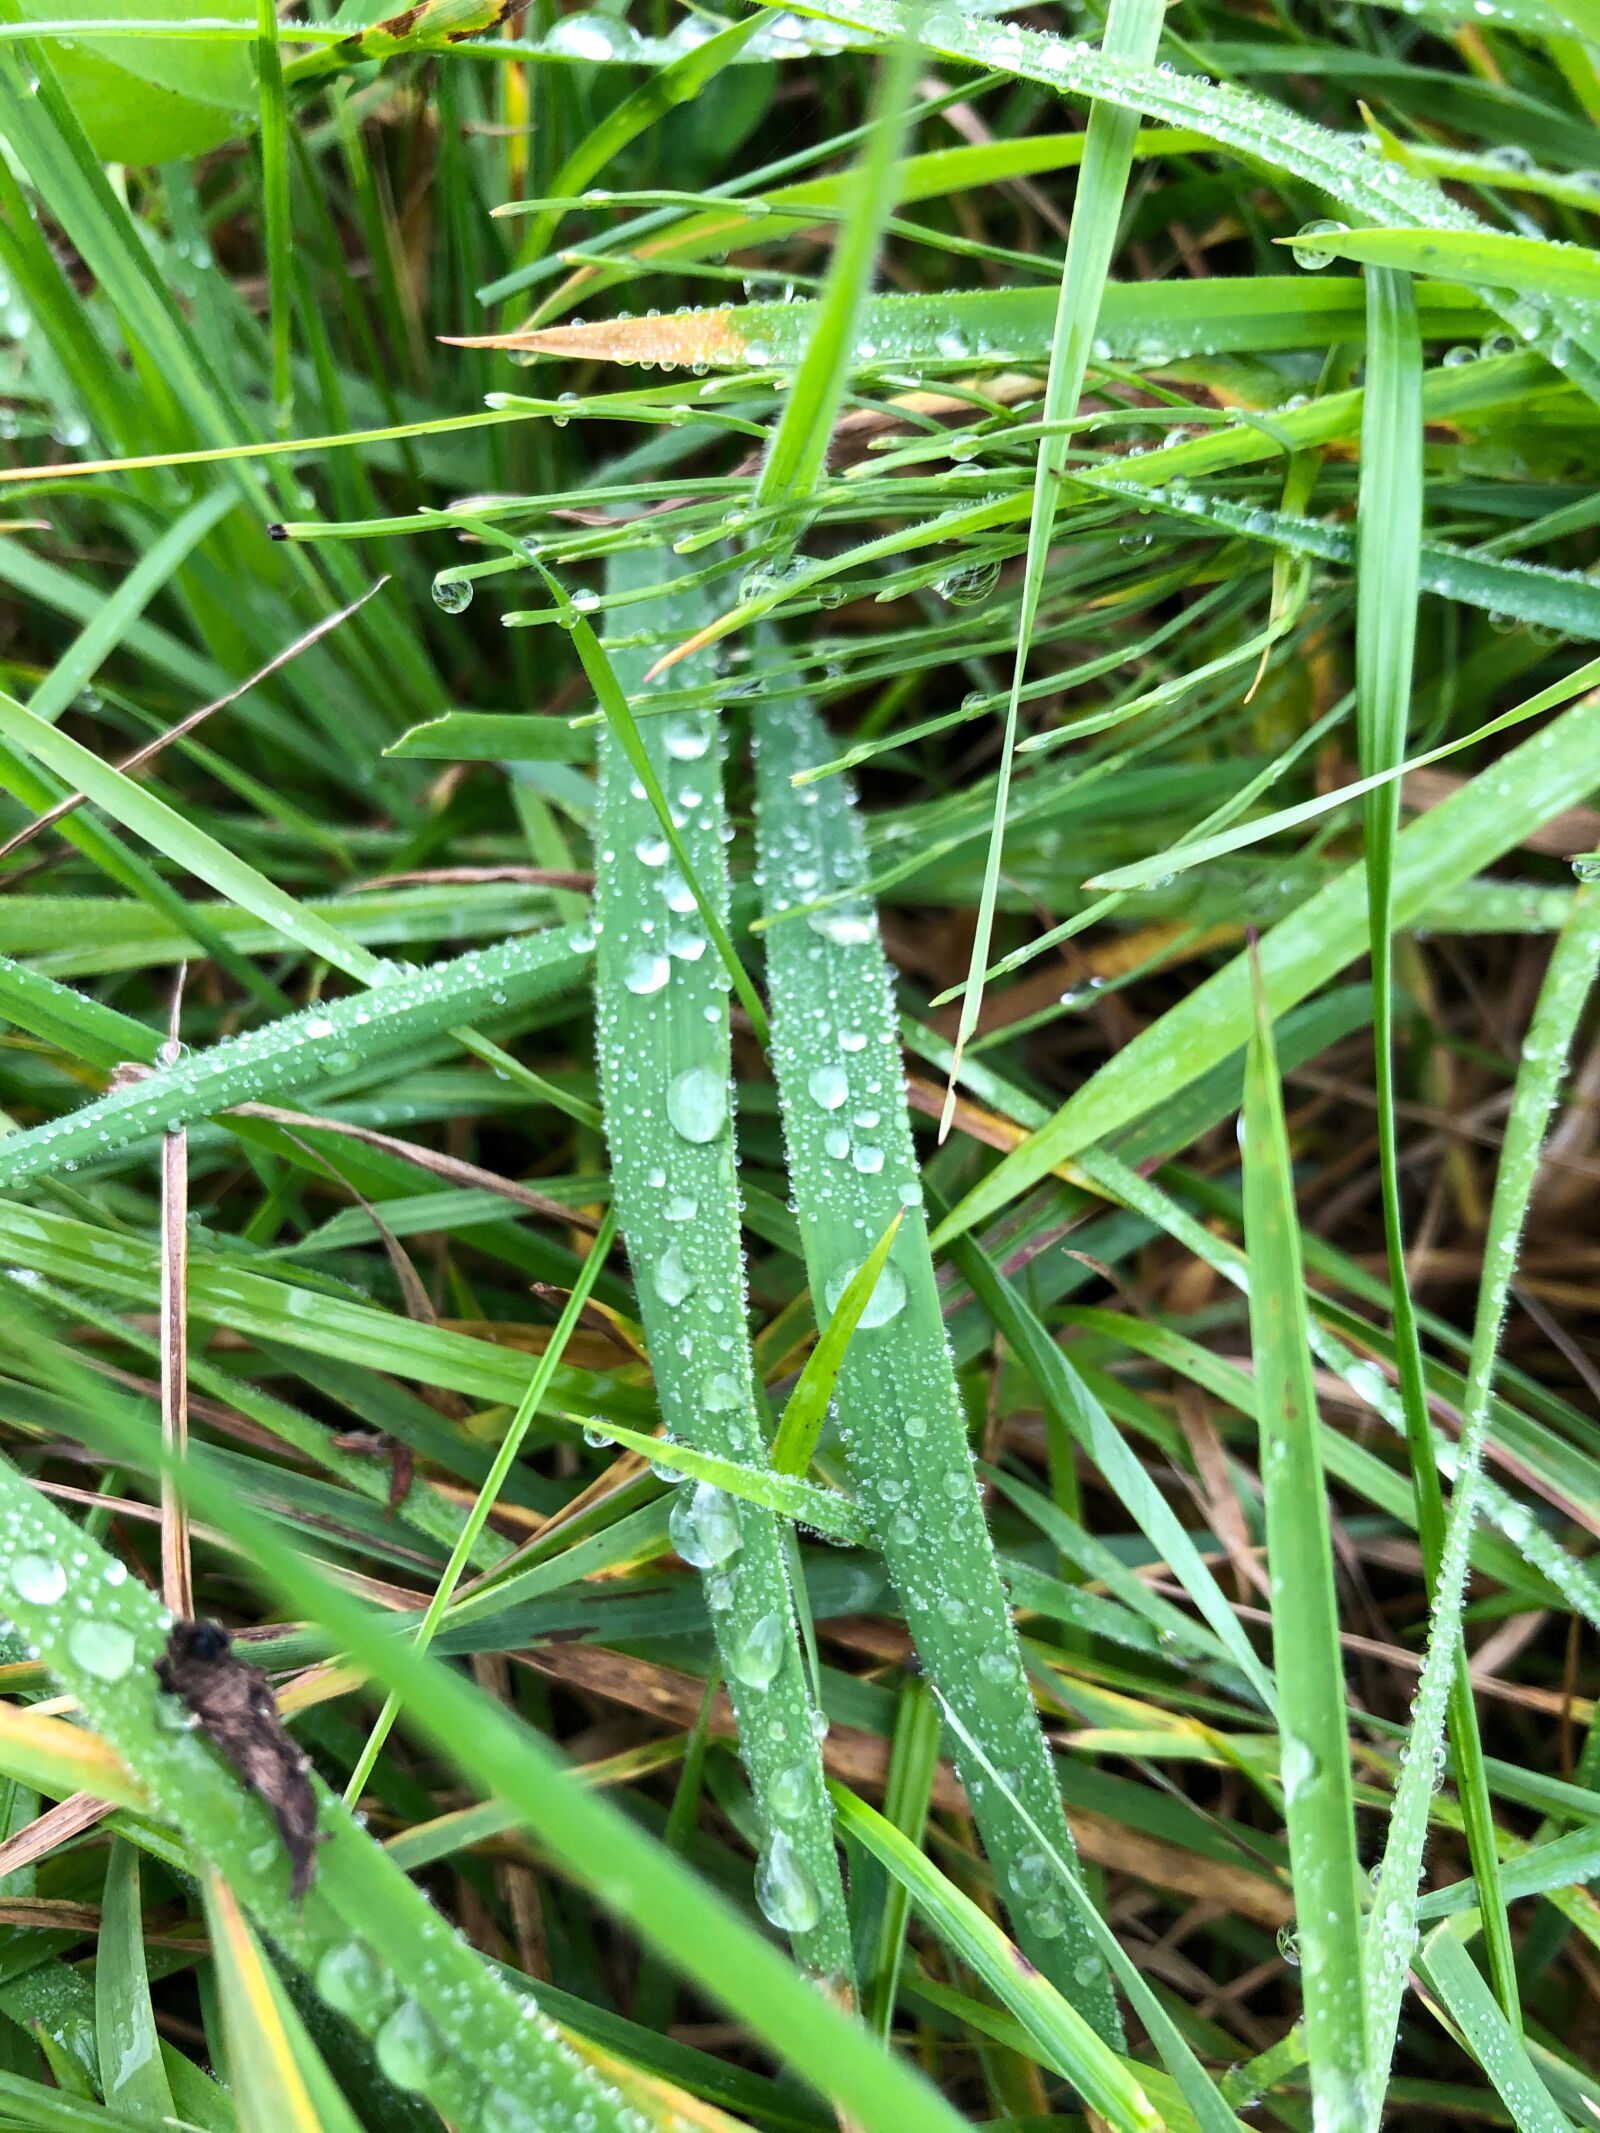 Apple iPhone 8 + iPhone 8 back camera 3.99mm f/1.8 sample photo. Grass, wet, drip photography